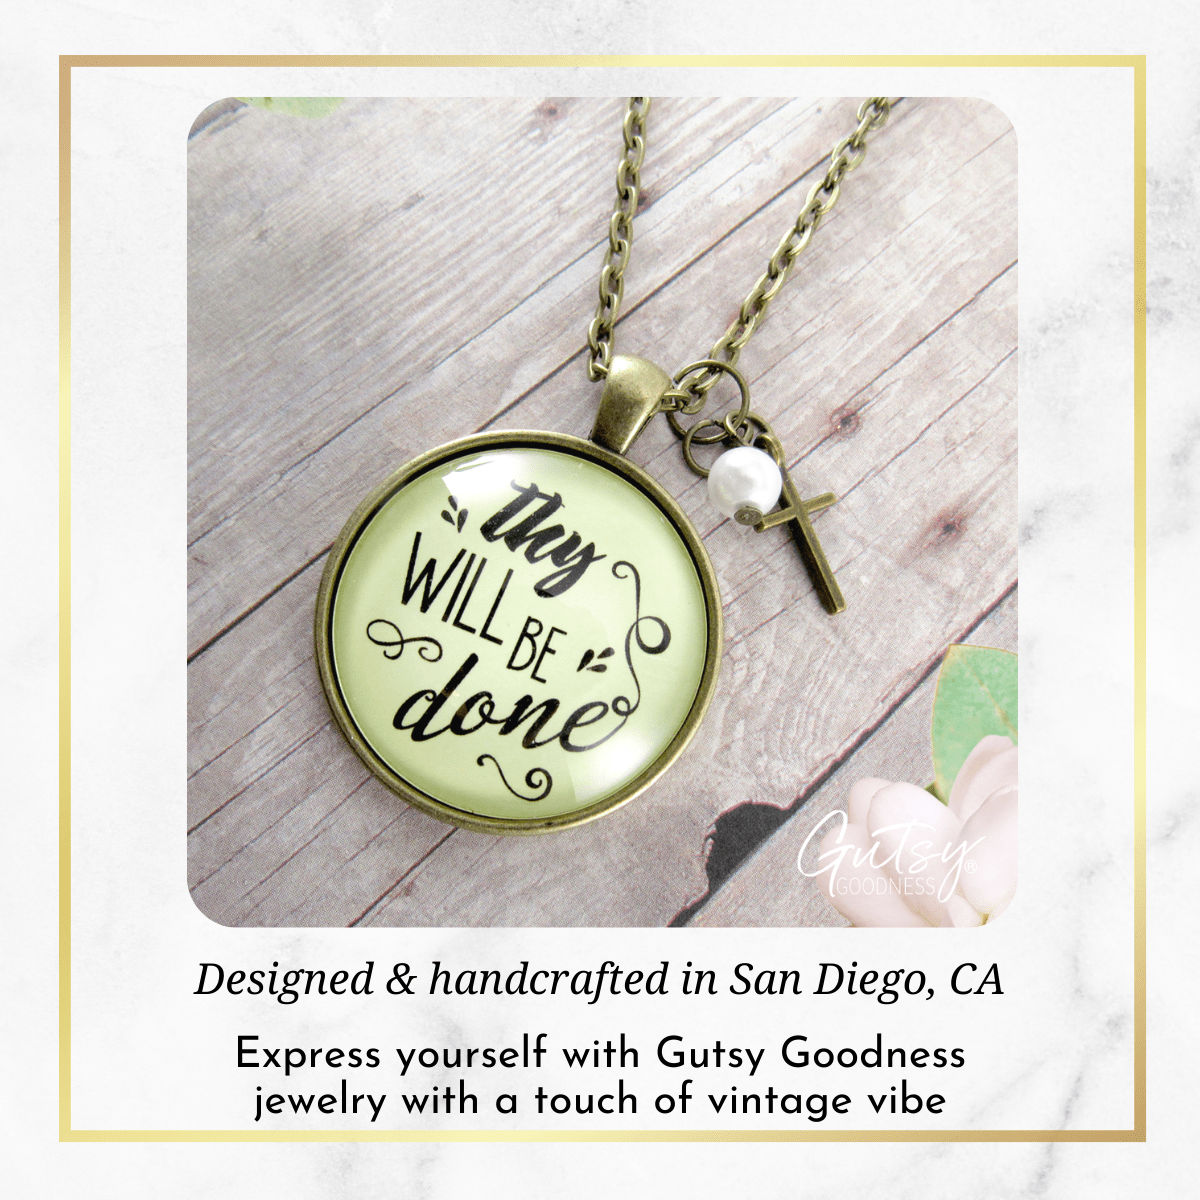 Gutsy Goodness Thy Will Be Done Christian Message Quote Necklace Cross Charm Jewelry - Gutsy Goodness Handmade Jewelry;Thy Will Be Done Christian Message Quote Necklace Cross Charm Jewelry - Gutsy Goodness Handmade Jewelry Gifts